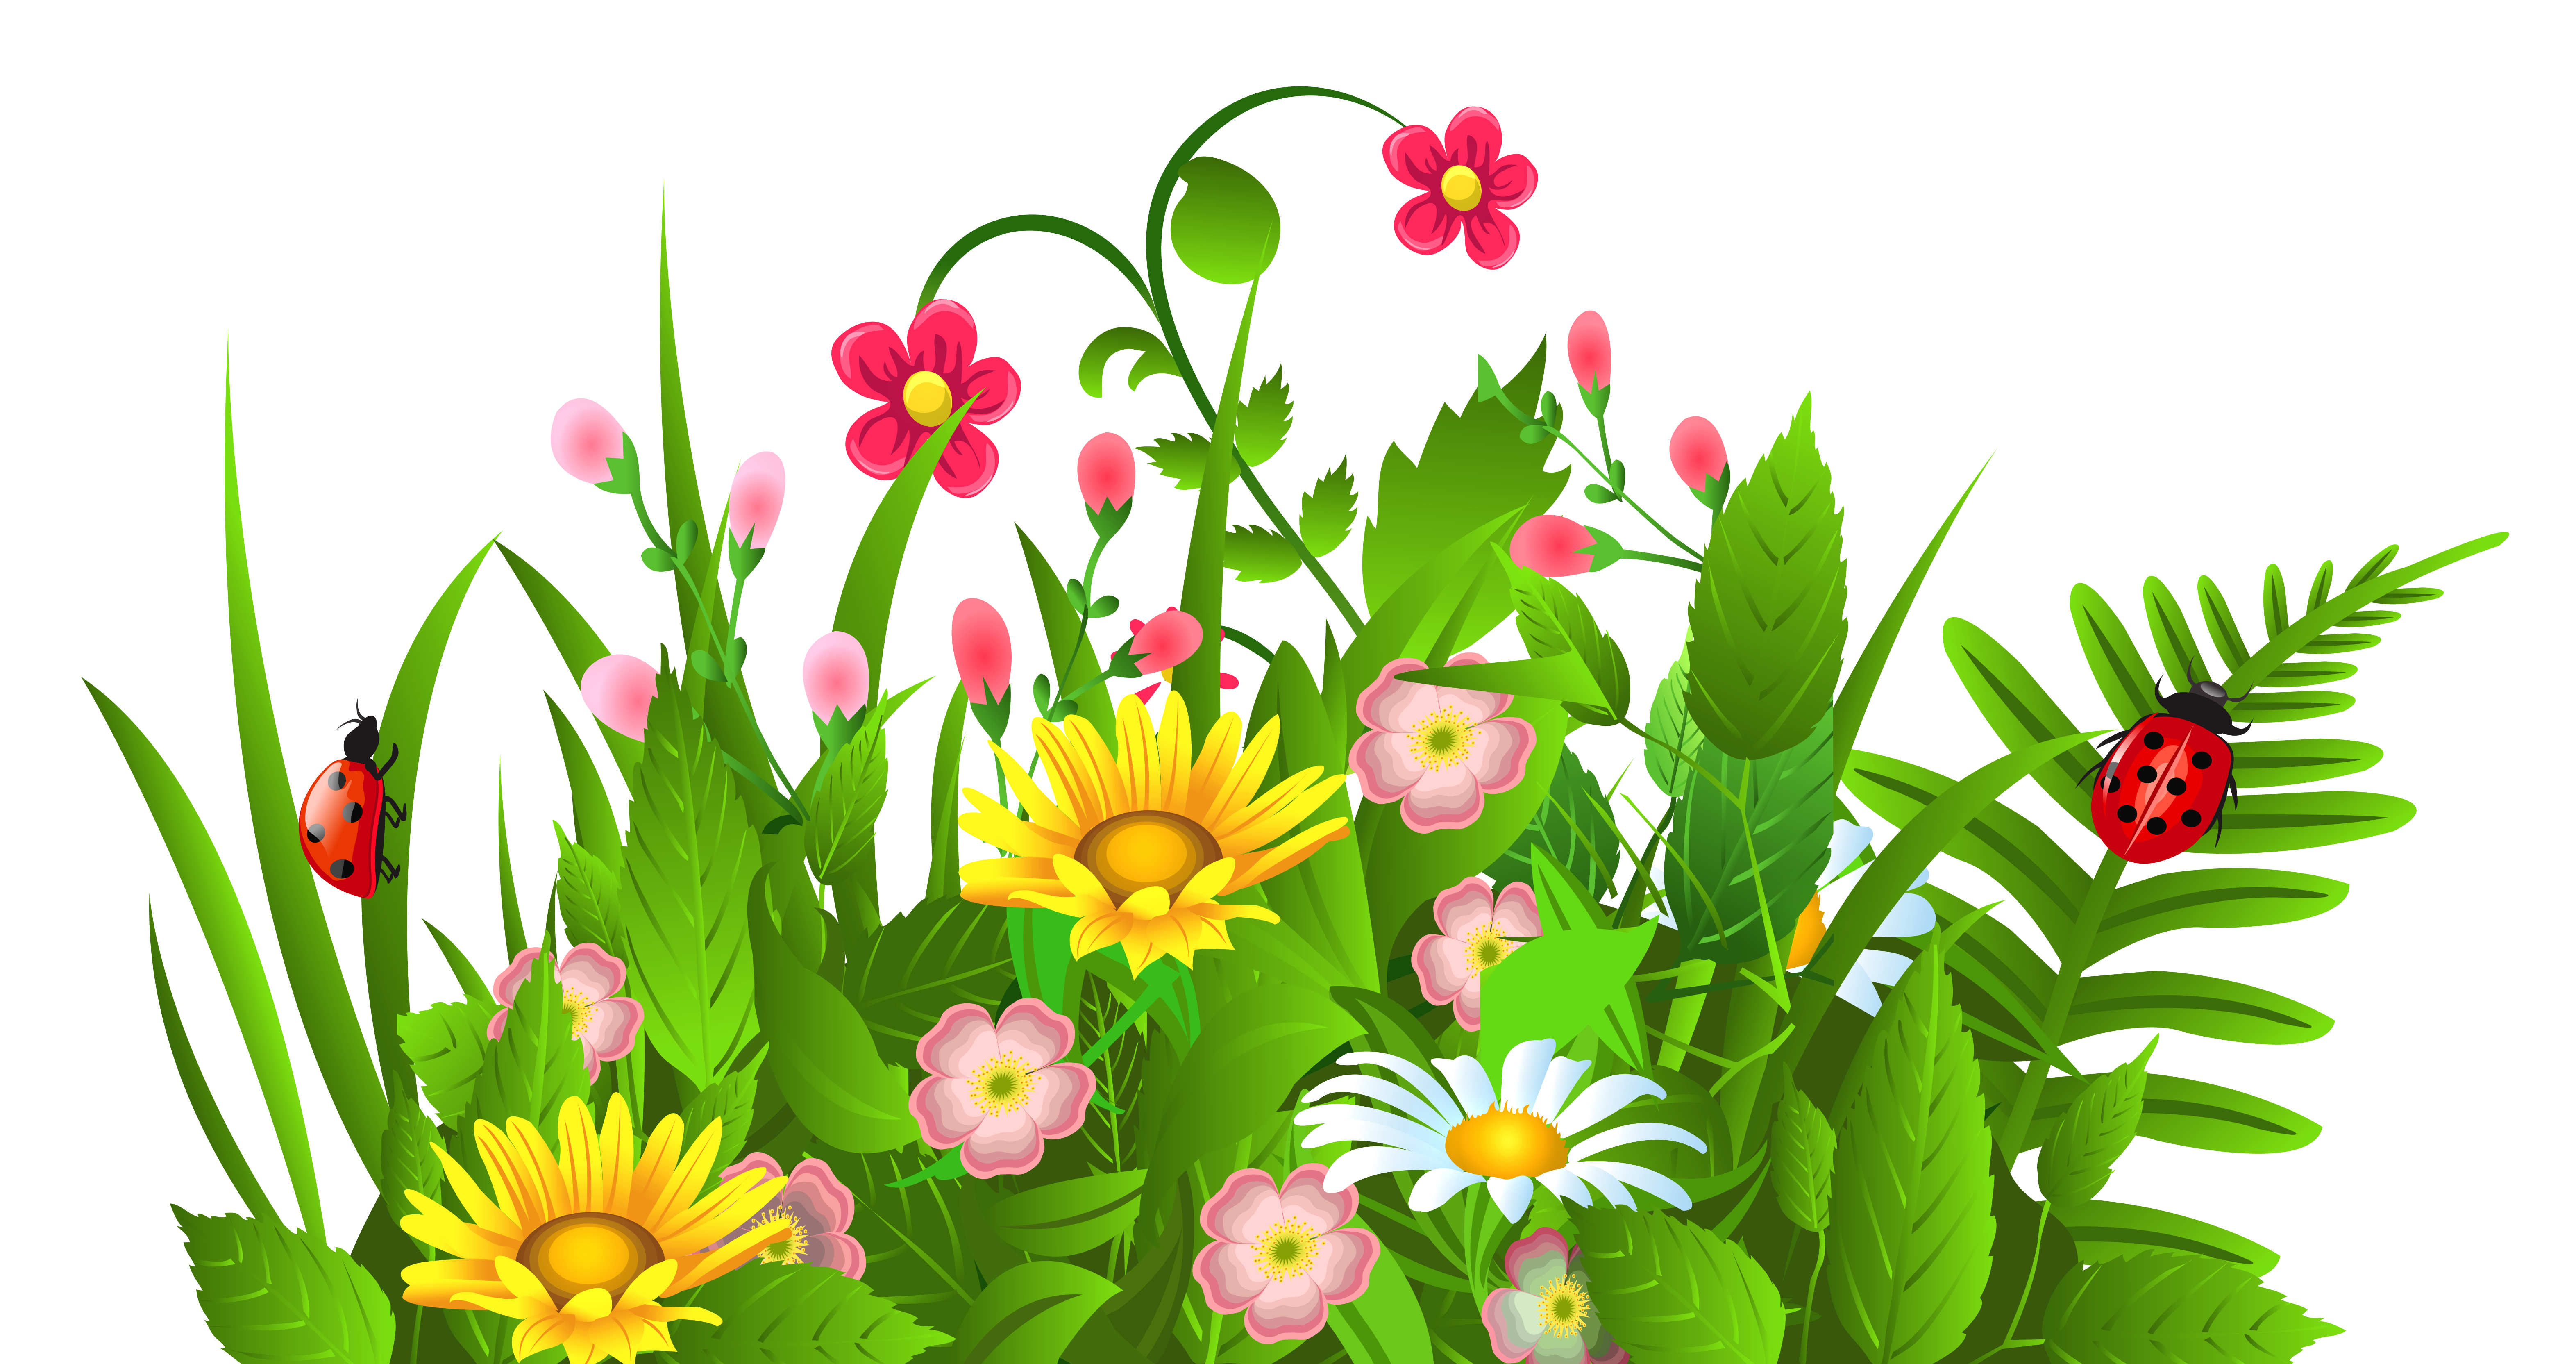 Free images of flower. Flowers clipart summer